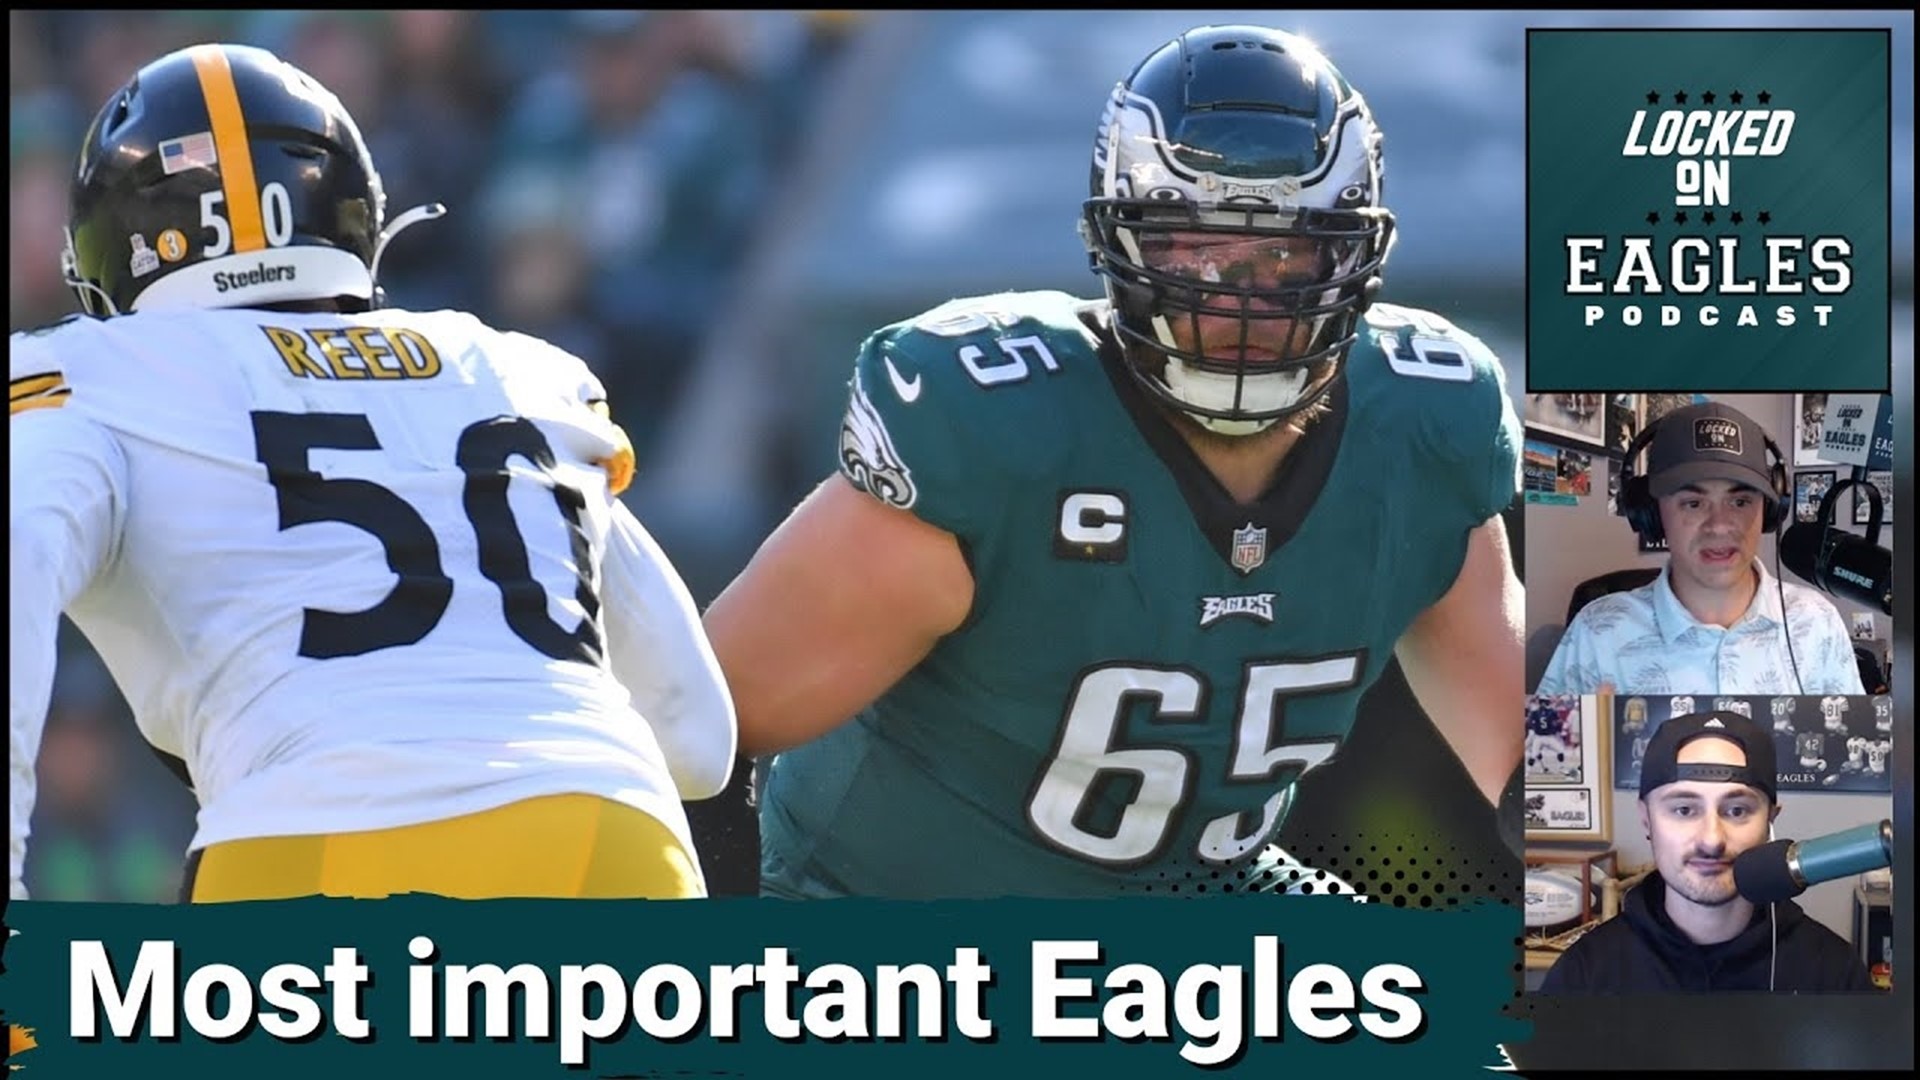 With the Philadelphia Eagles having one of the deepest rosters in the National Football League, some players stand above others in terms of importance.